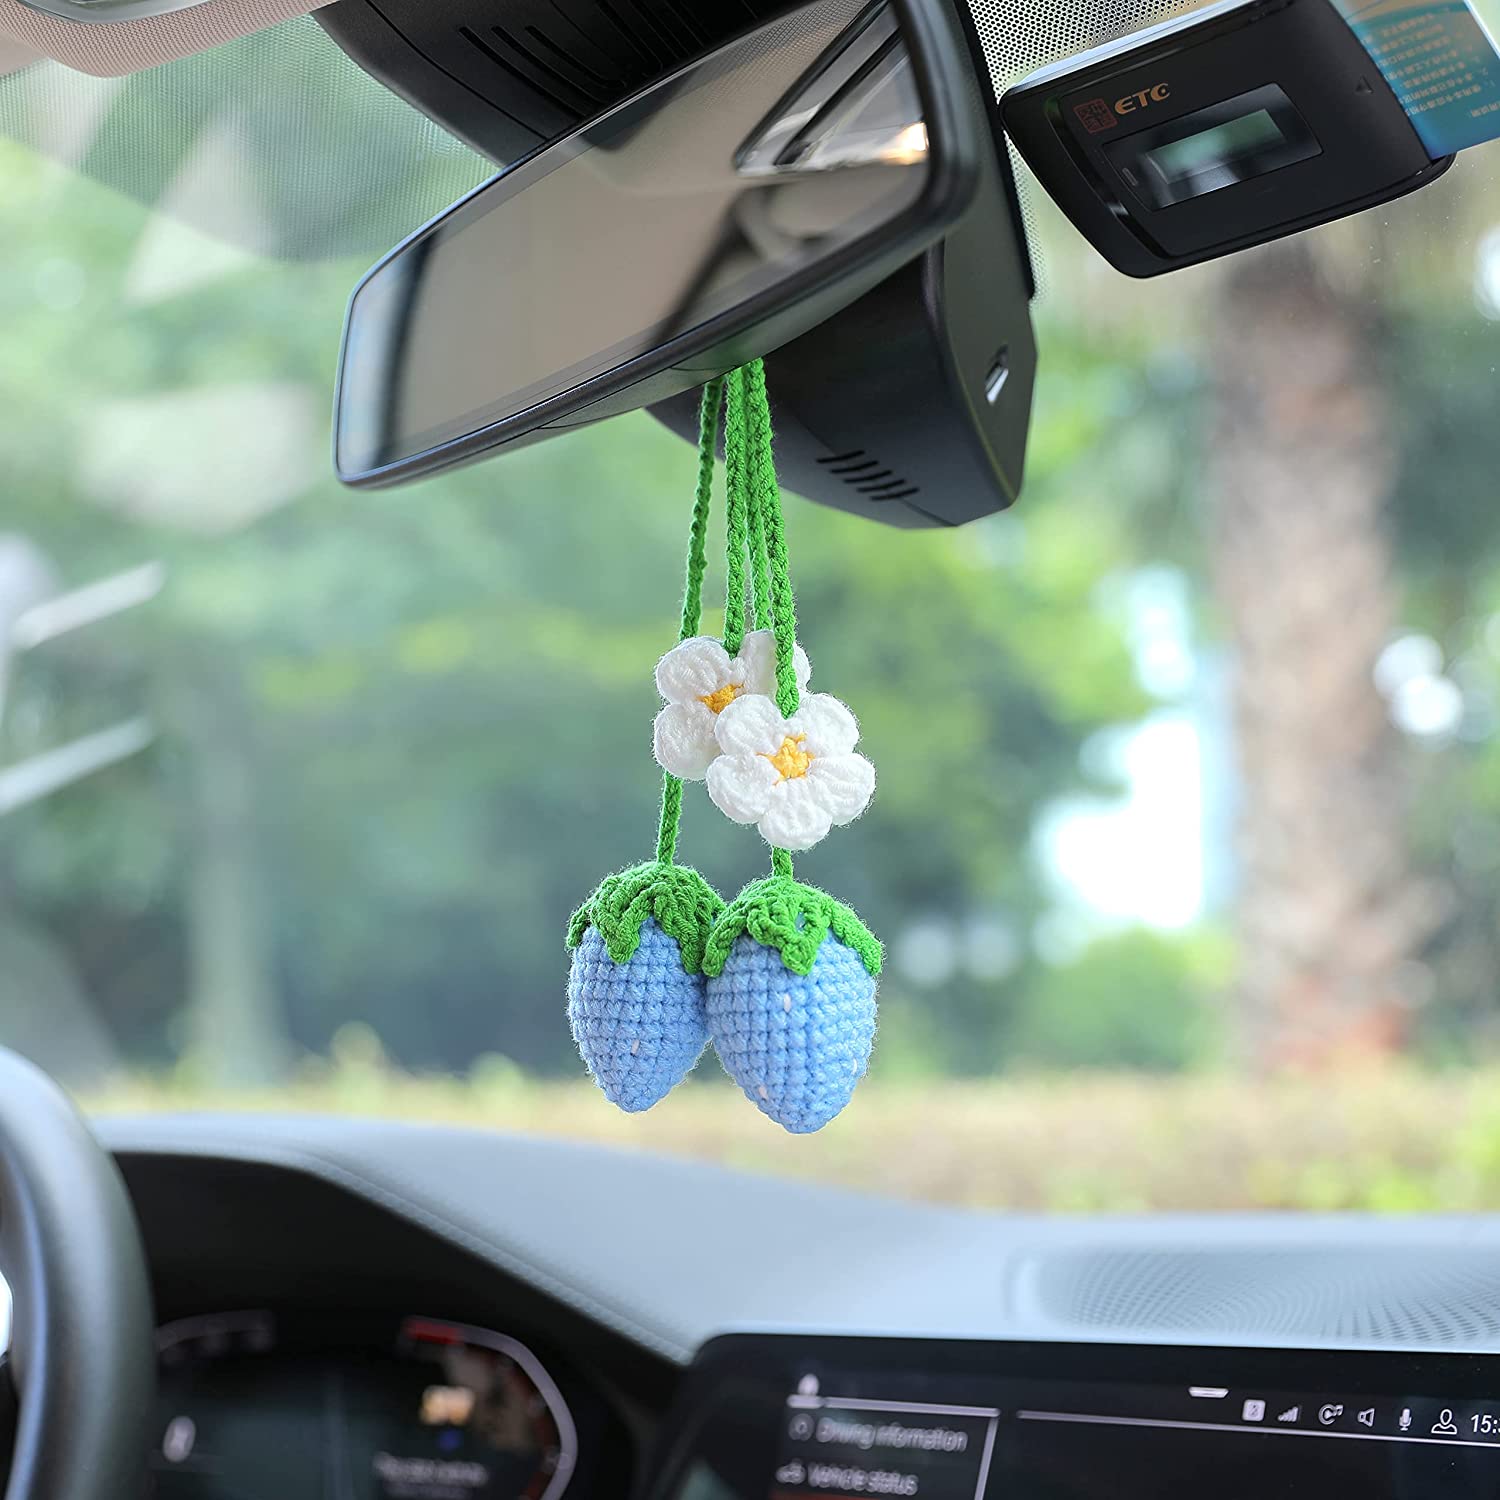 Car Mirror Charm, Mushroom Rear-view Mirror Hanging, Car Accessories, New  Car Gift, Gift for New Car, Christmas Gift -  UK